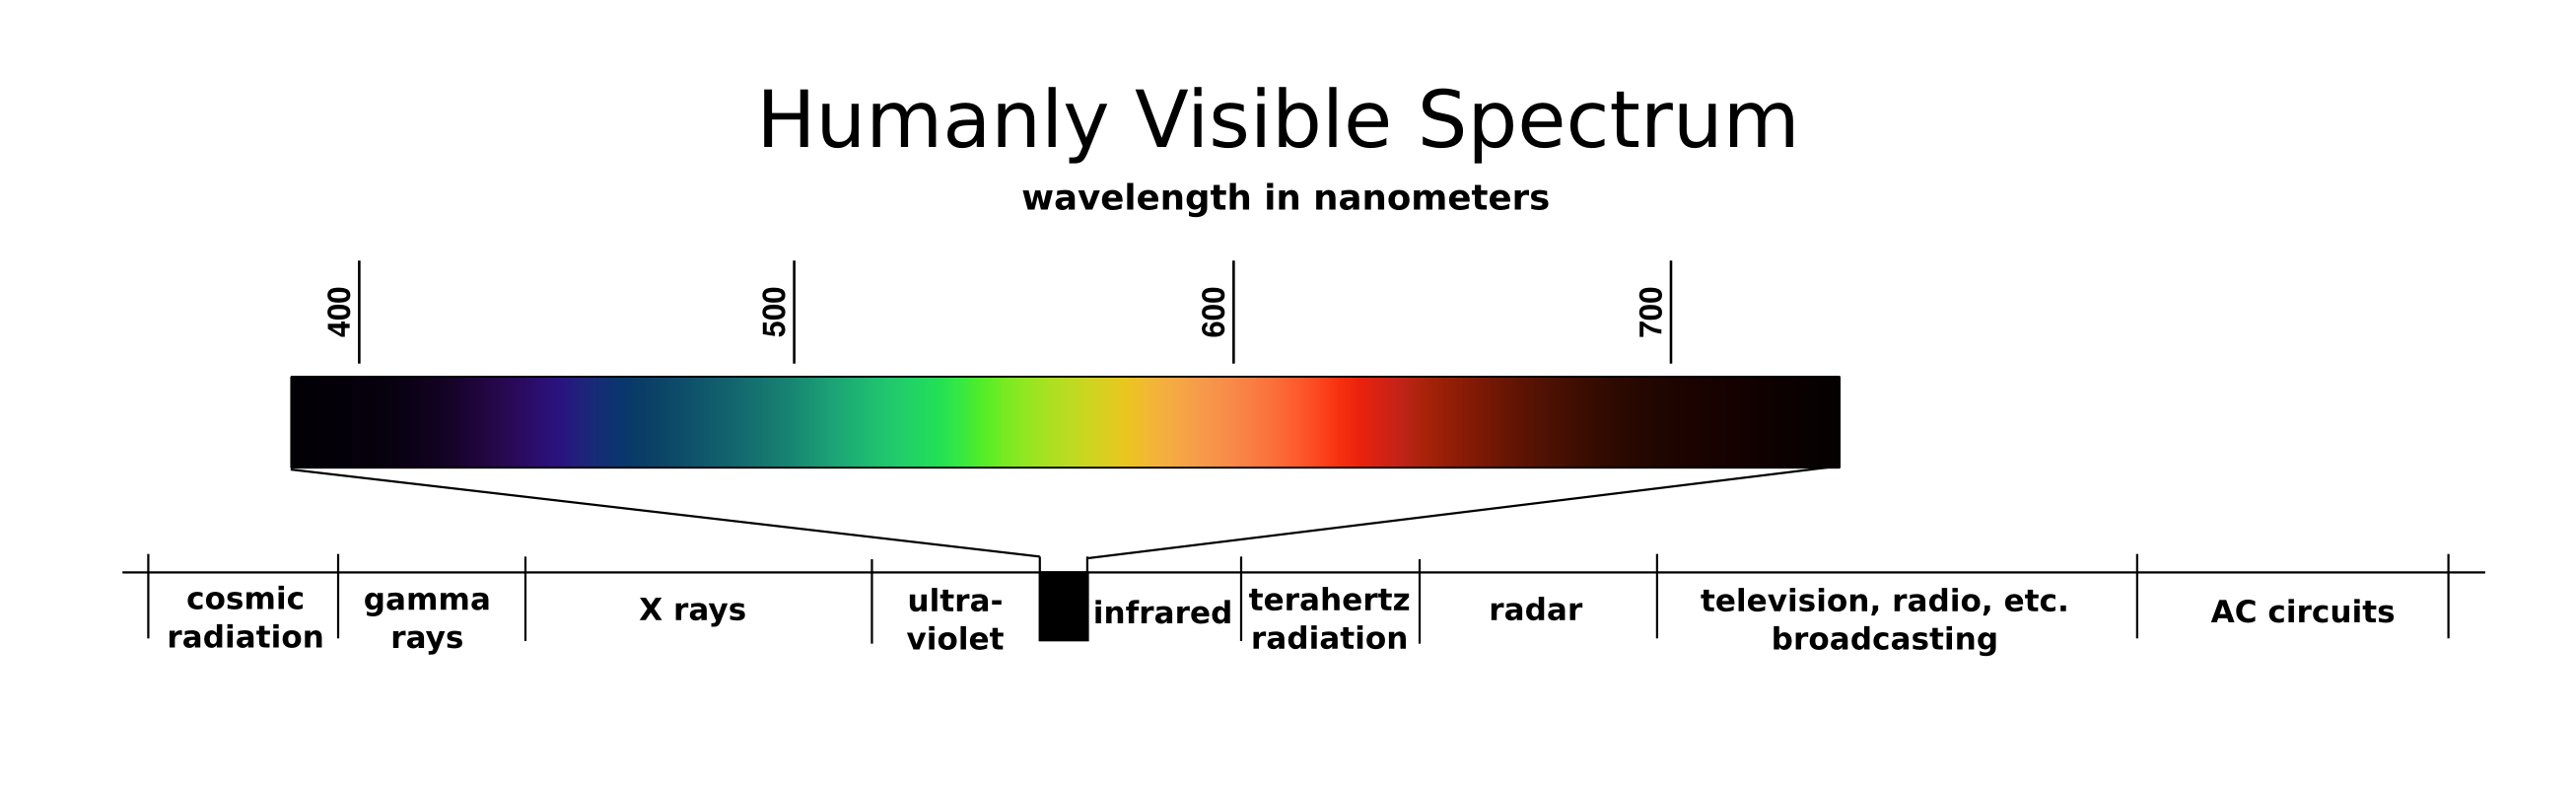 Only a very small portion of the electromagnetic spectrum is visible. This visible spectrum is found between ultraviolet and infrared light.